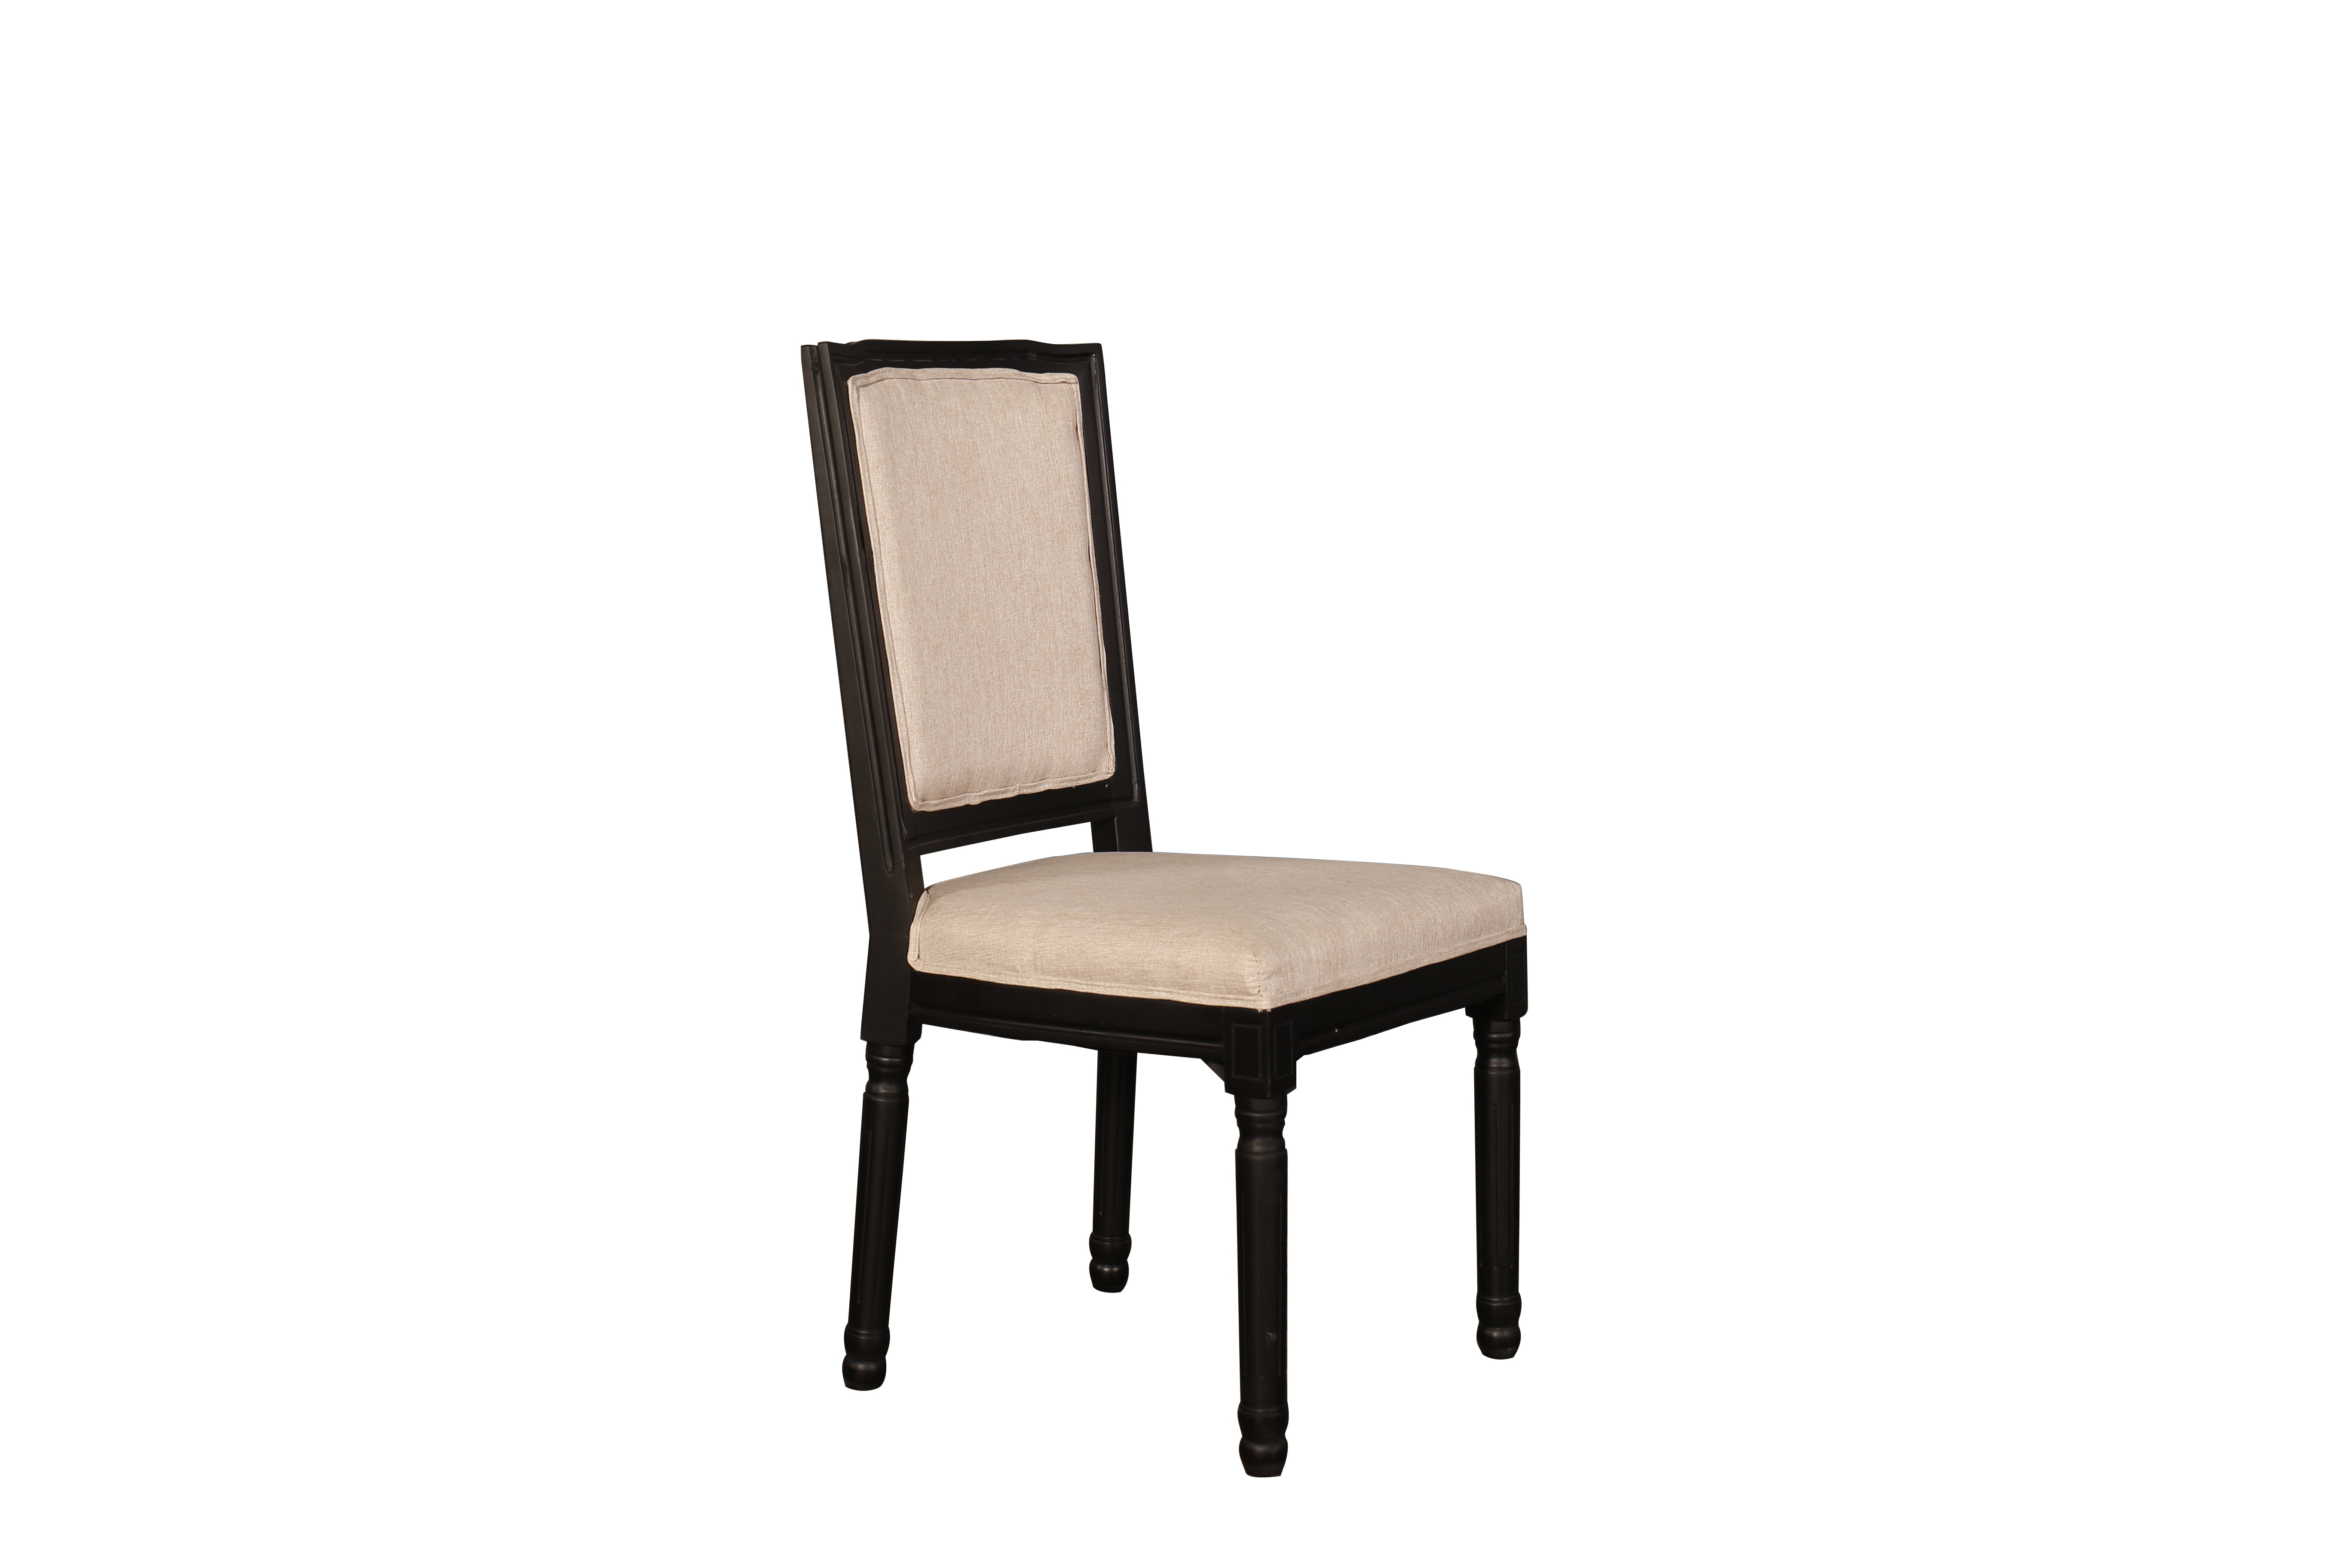 Distressed Dining Room Chairs For Sale